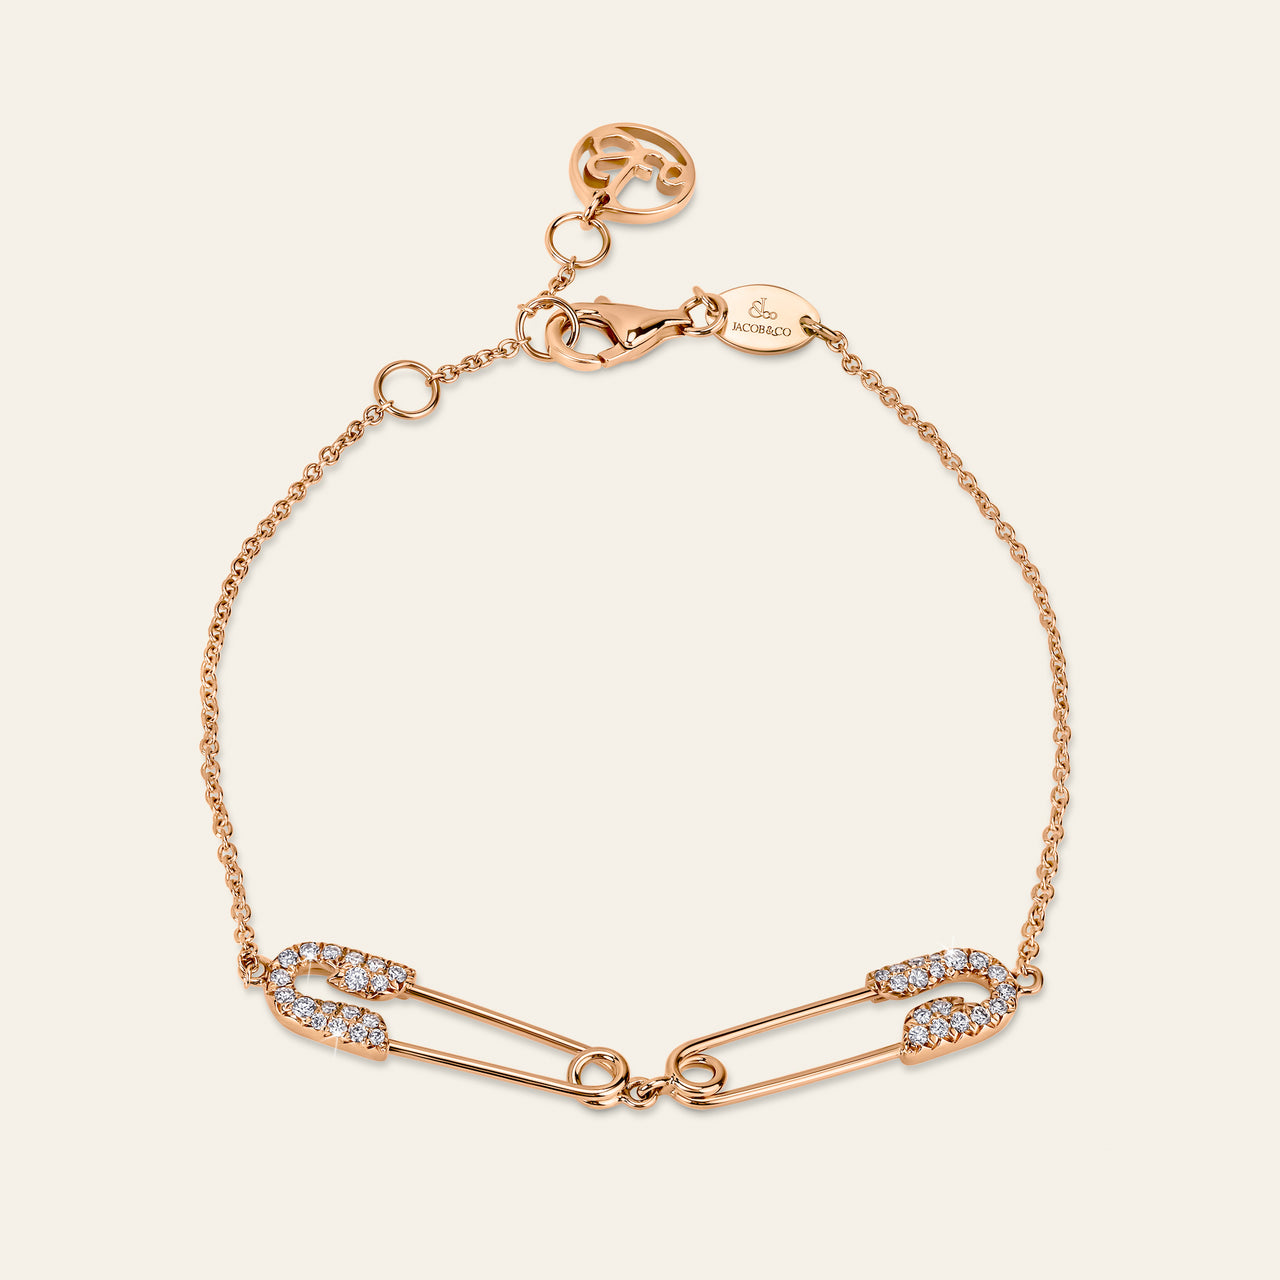 Jacob & Co. Perfect Fit Rose Gold Leather Bracelet